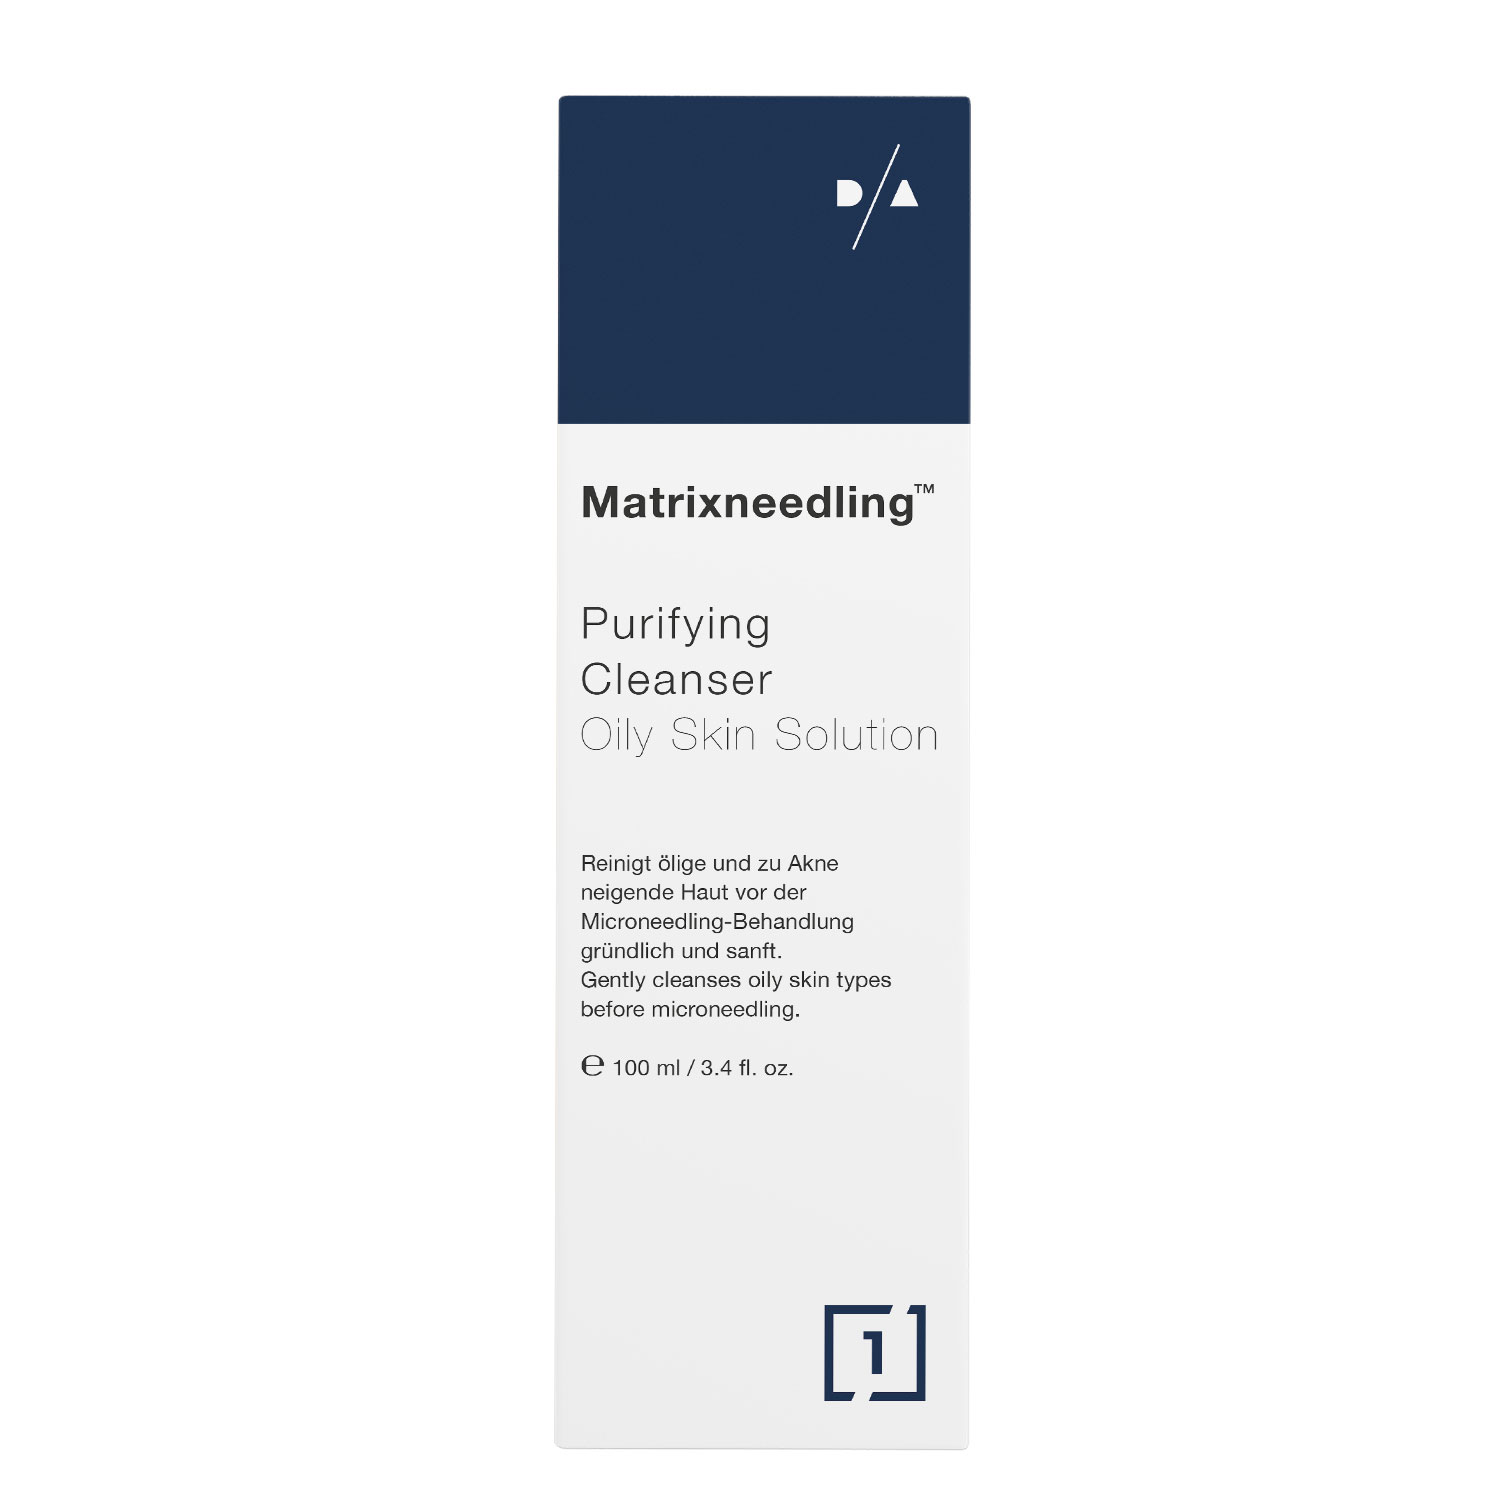 D/A Matrixneedling™ Purifying Cleanser